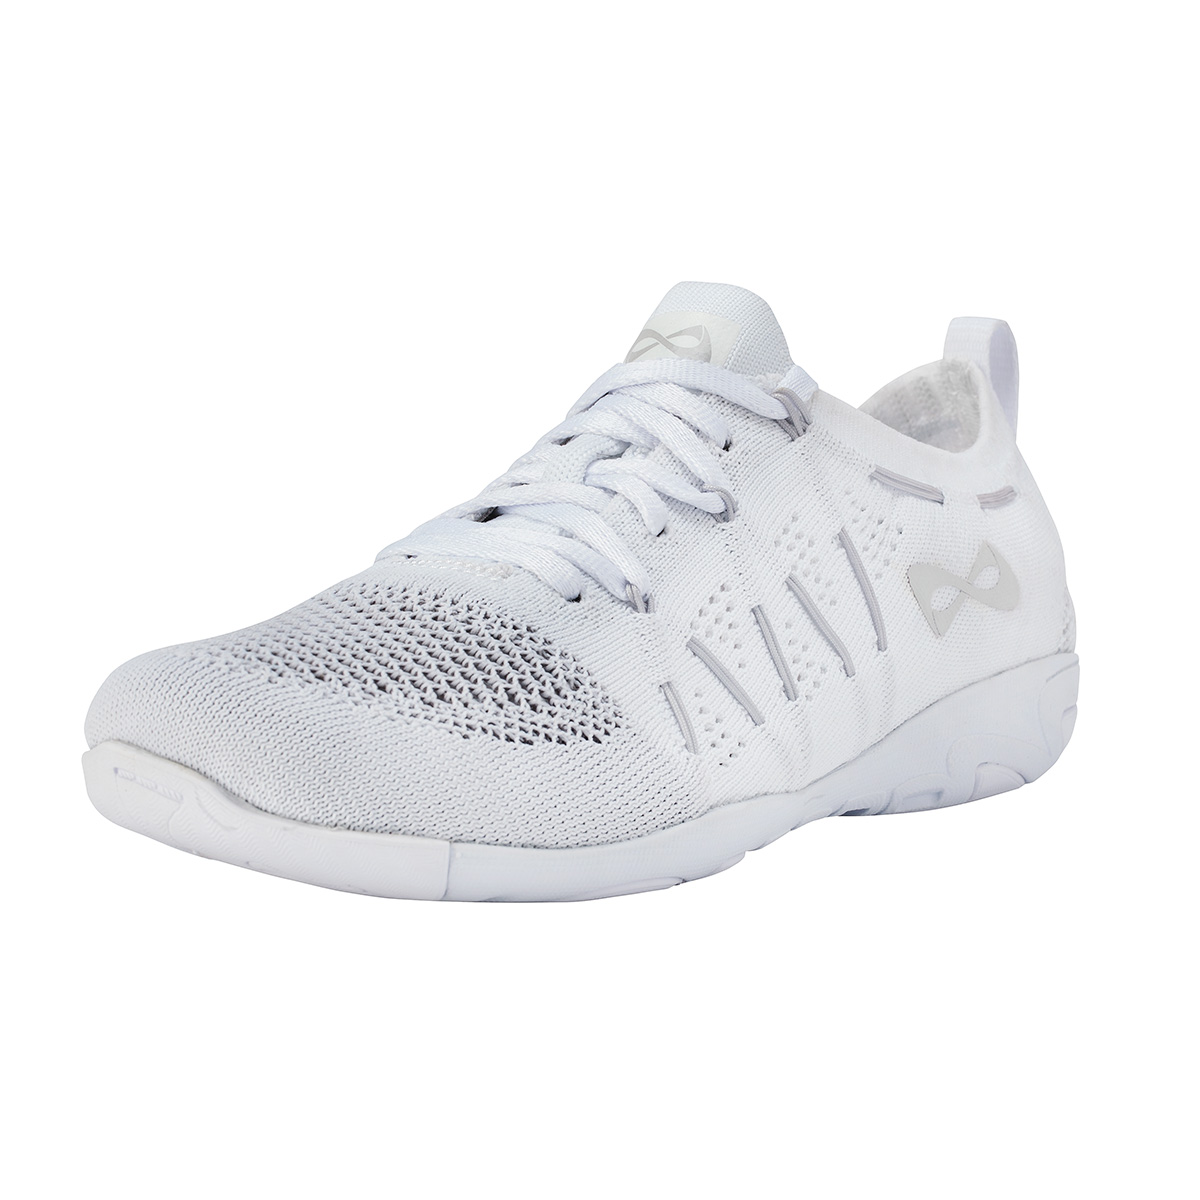 nfinity flyte cheer shoes